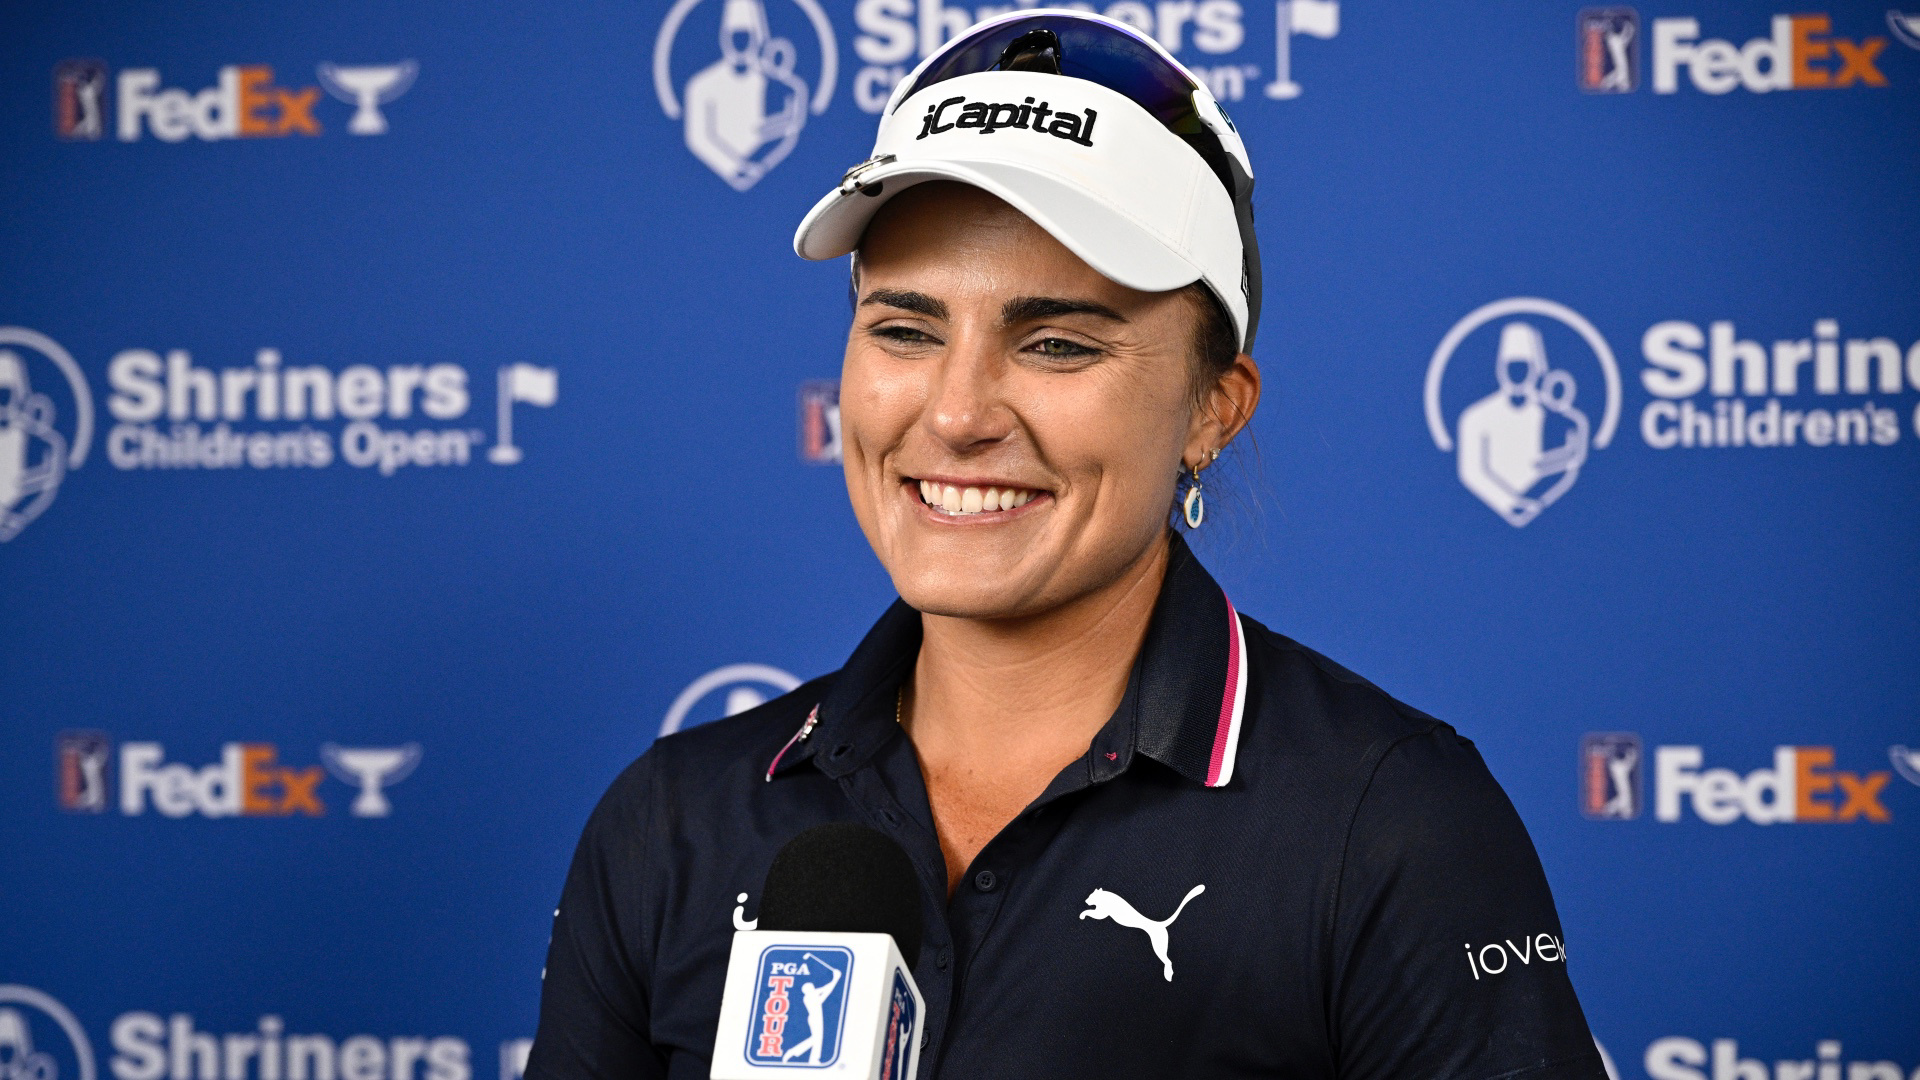 Lexi Thompson at Shriners Open Updated scores, tee times, TV coverage